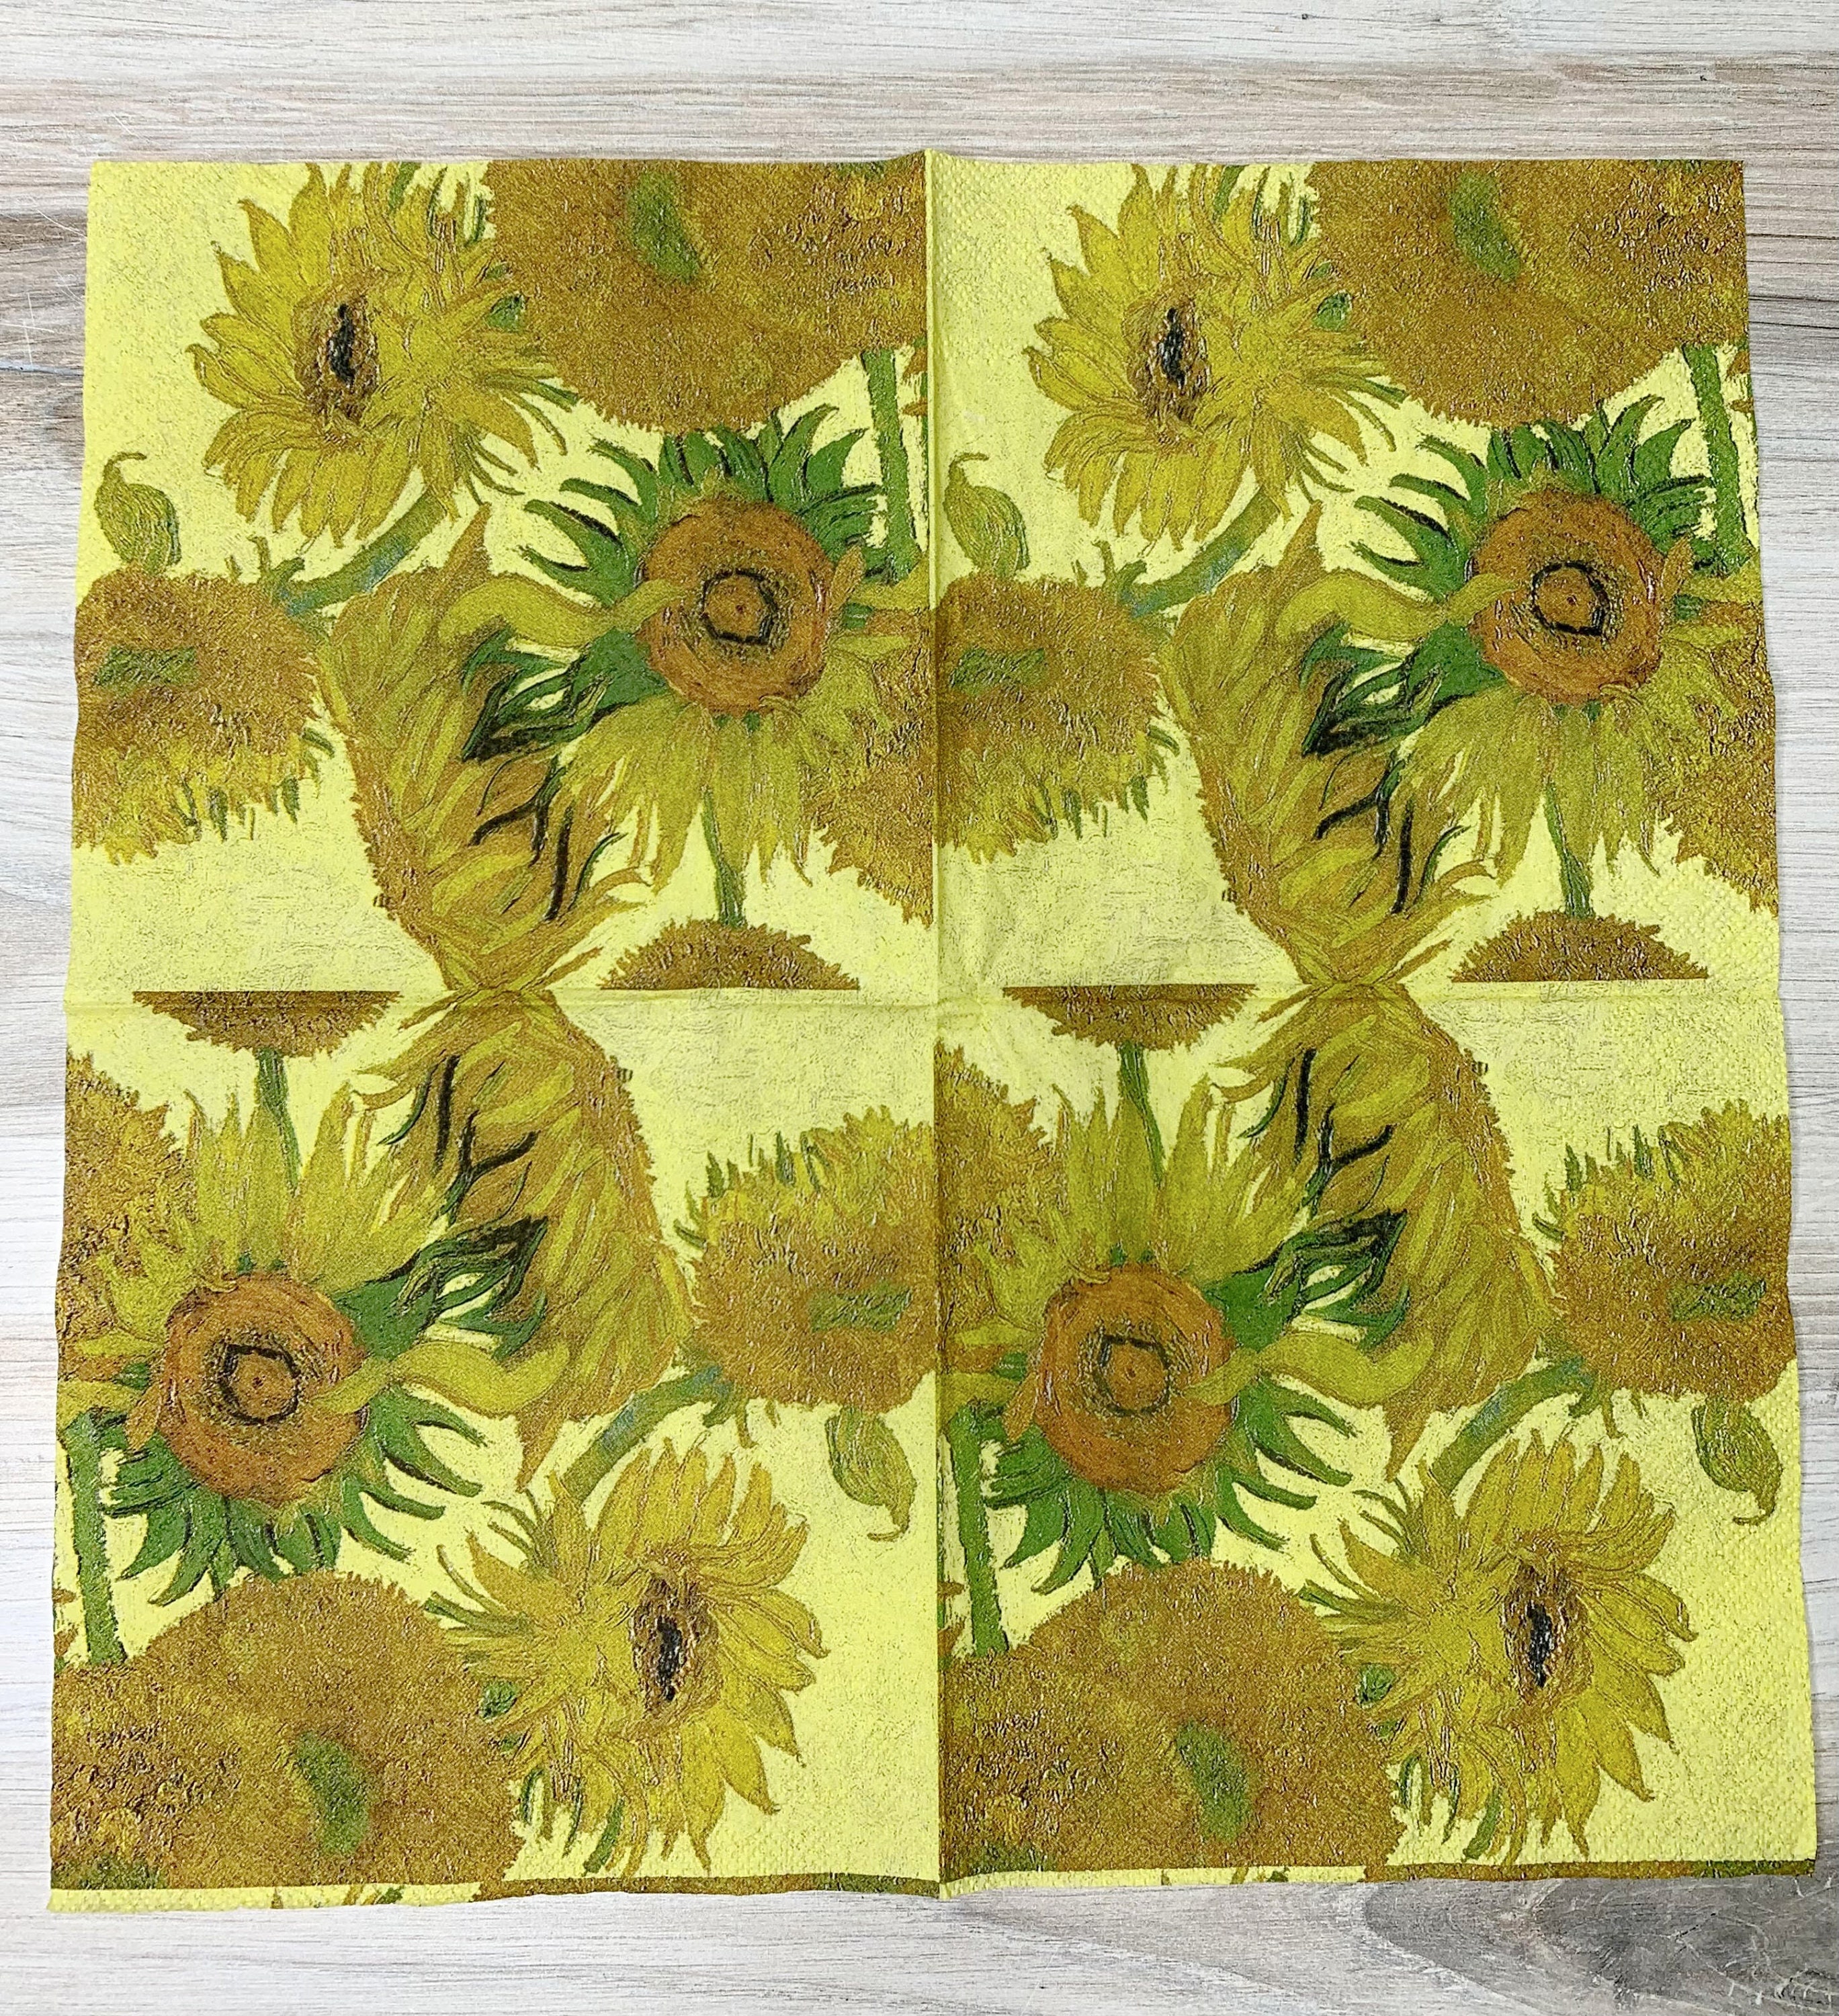 3 x Single Paper Napkins For Decoupage Yellow Van Gogh Painting Sunflowers M349 